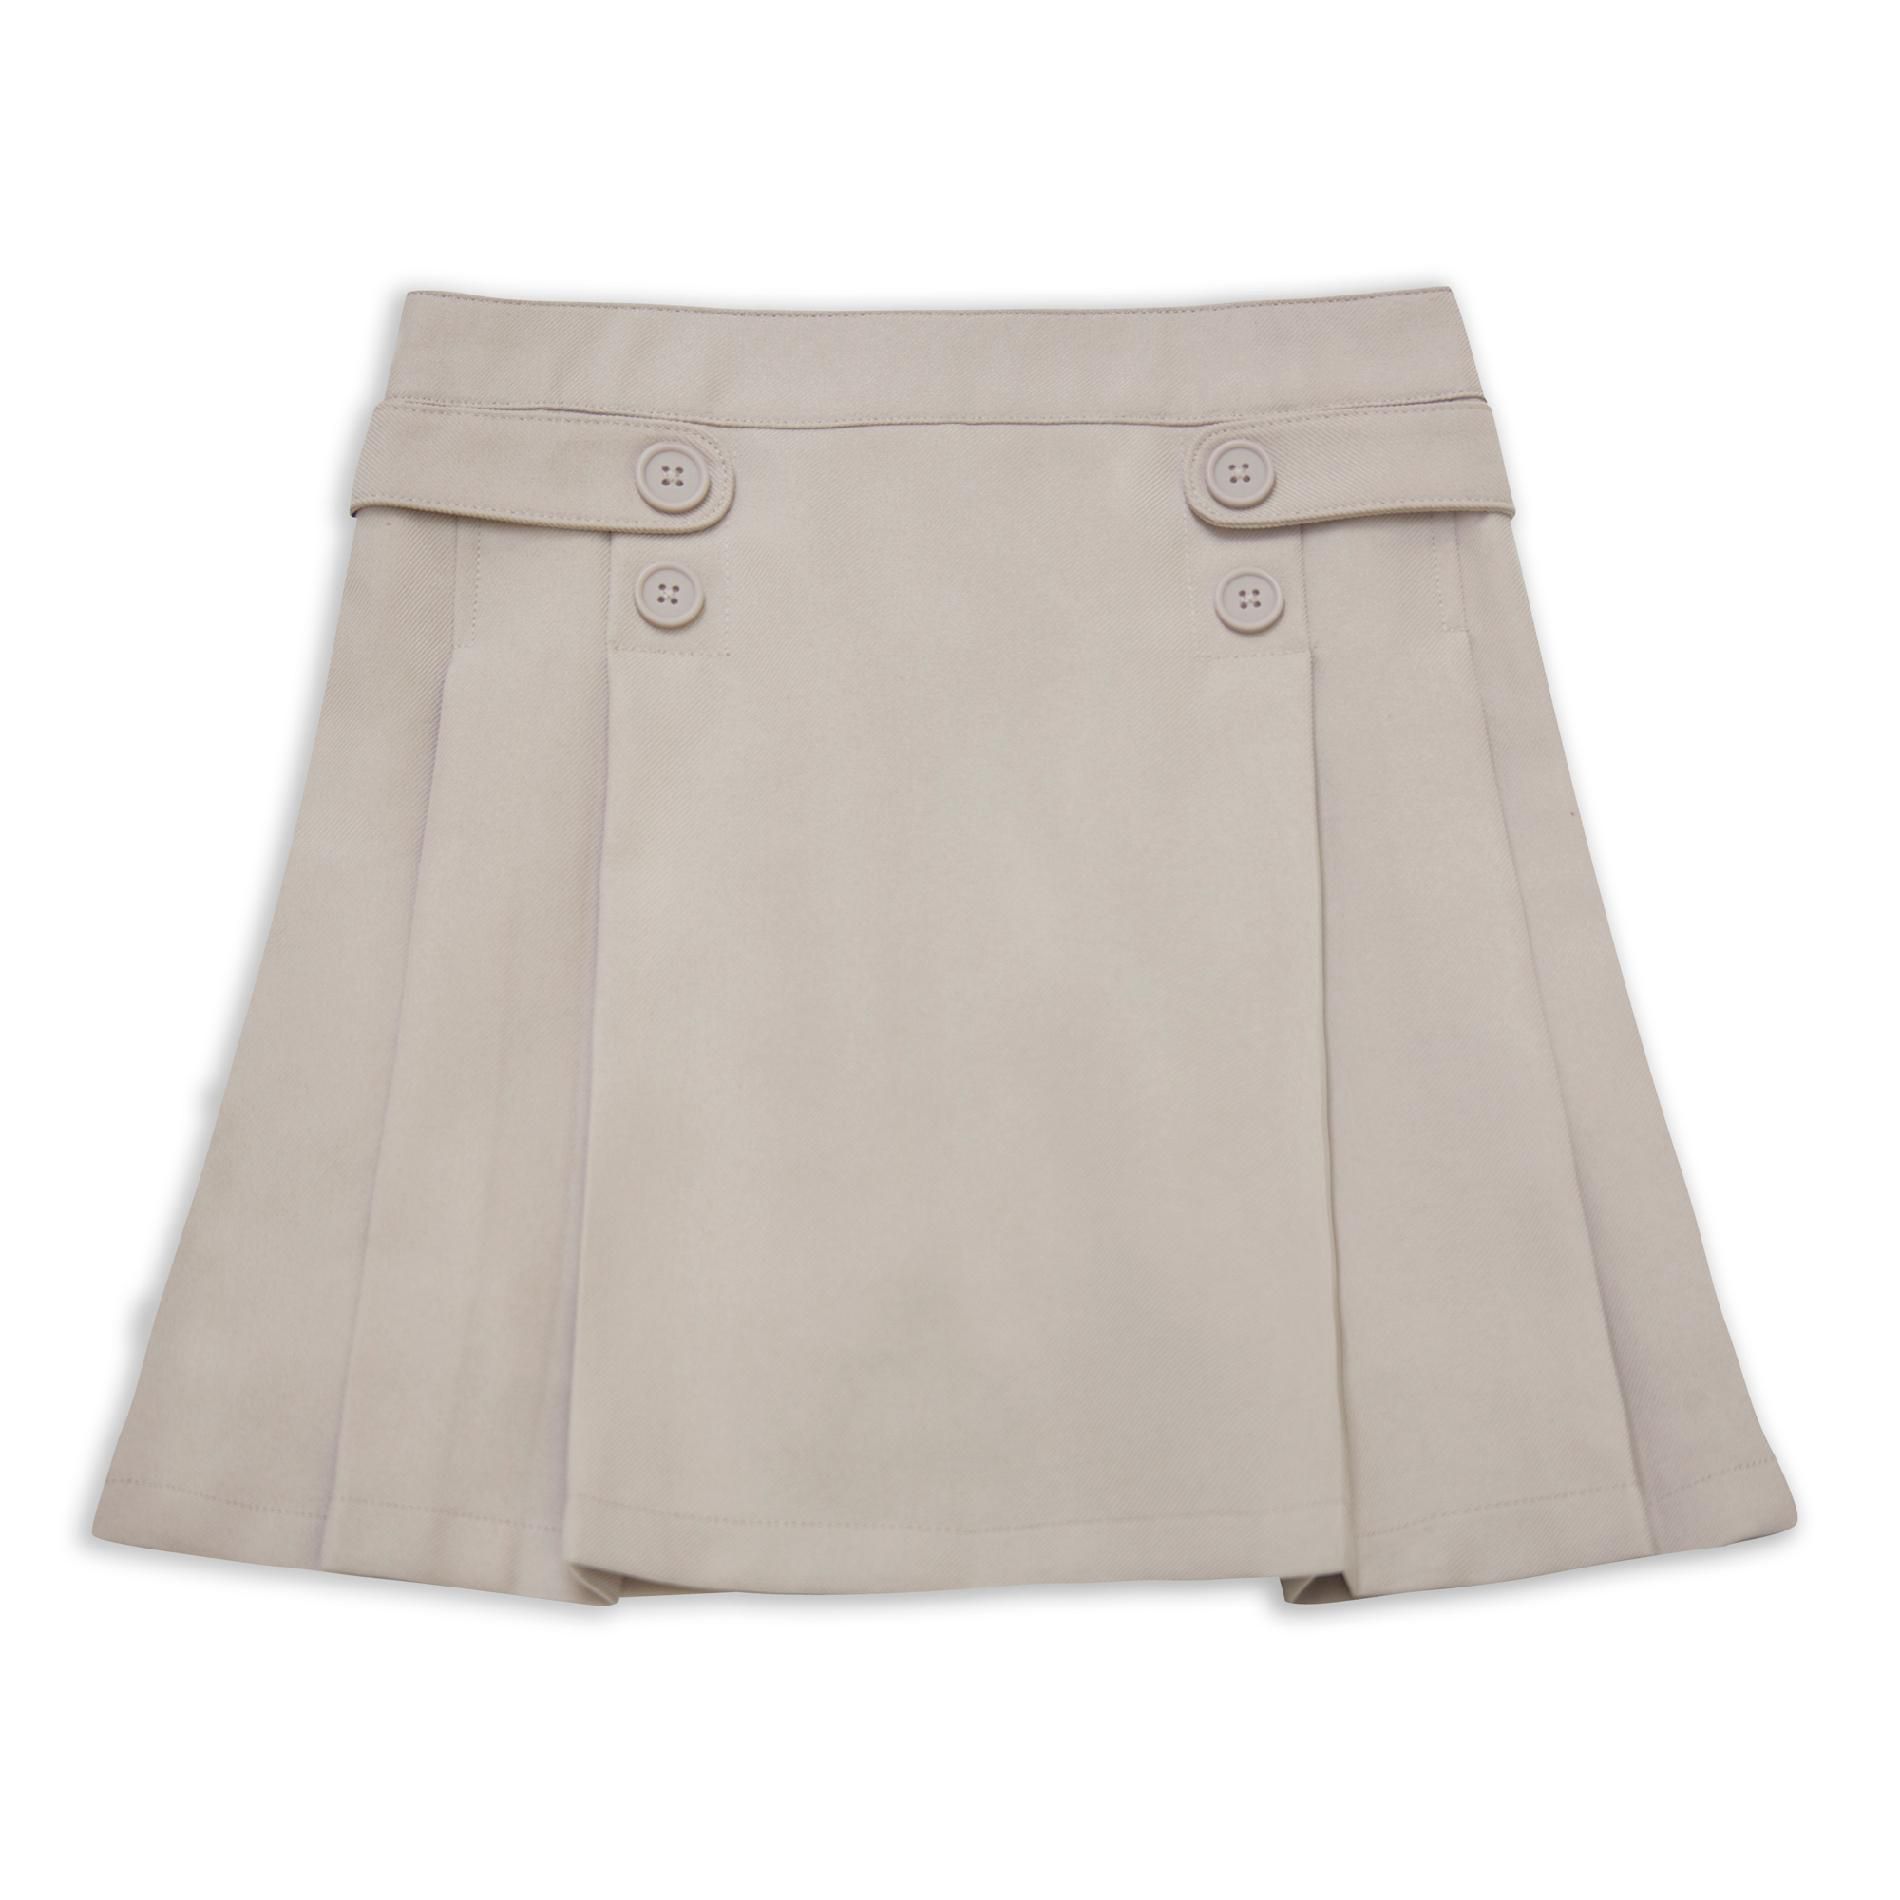 Dockers Girl's Scooter Skirt with Shorts Pleated Button Accent